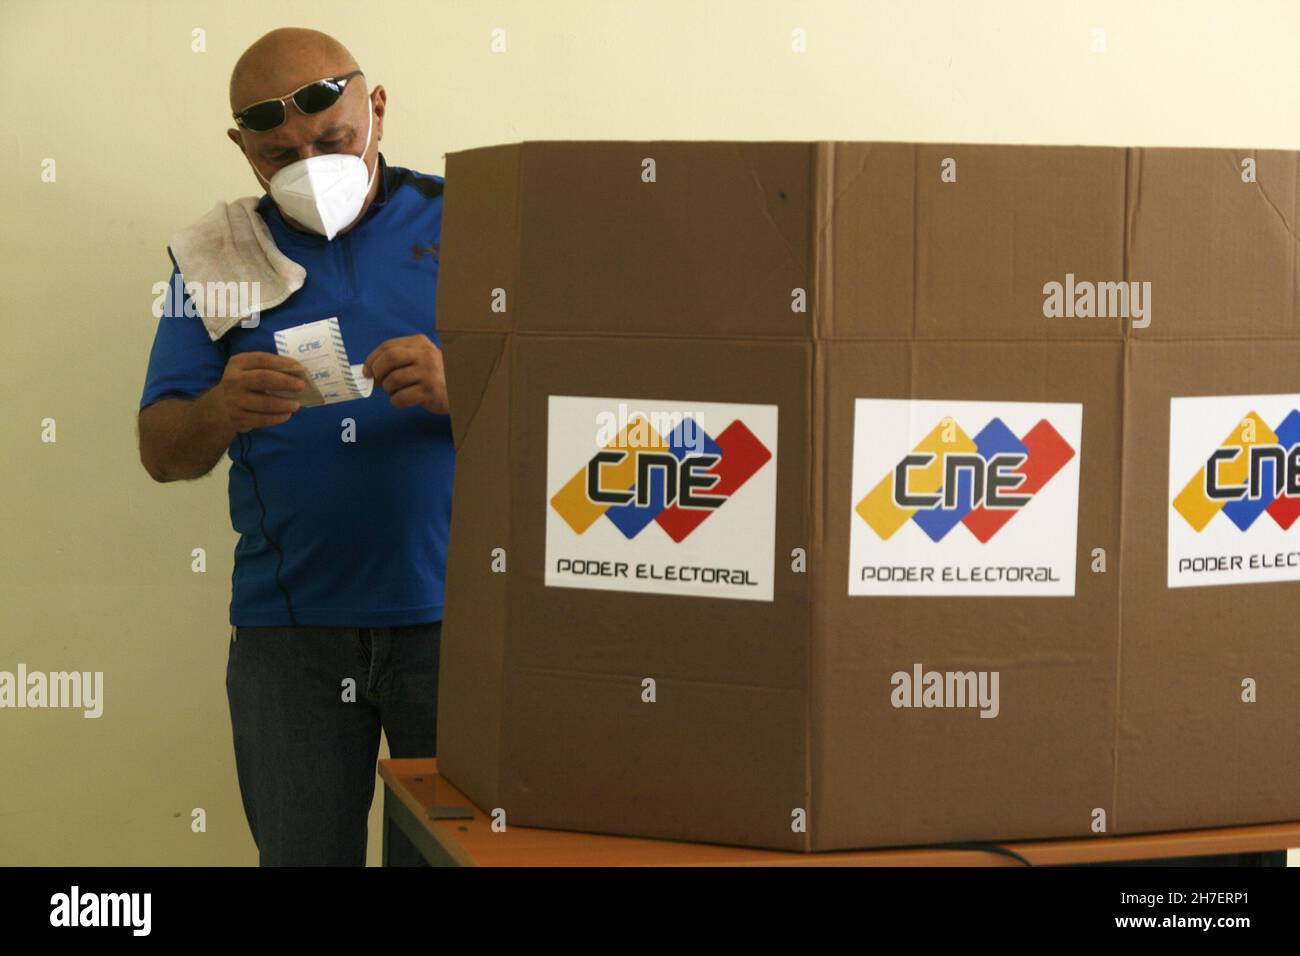 Non Exclusive: Venezuelan citizens attend at the voting booths to cast their vote during the electoral process to elect governors and mayors. On Novem Stock Photo